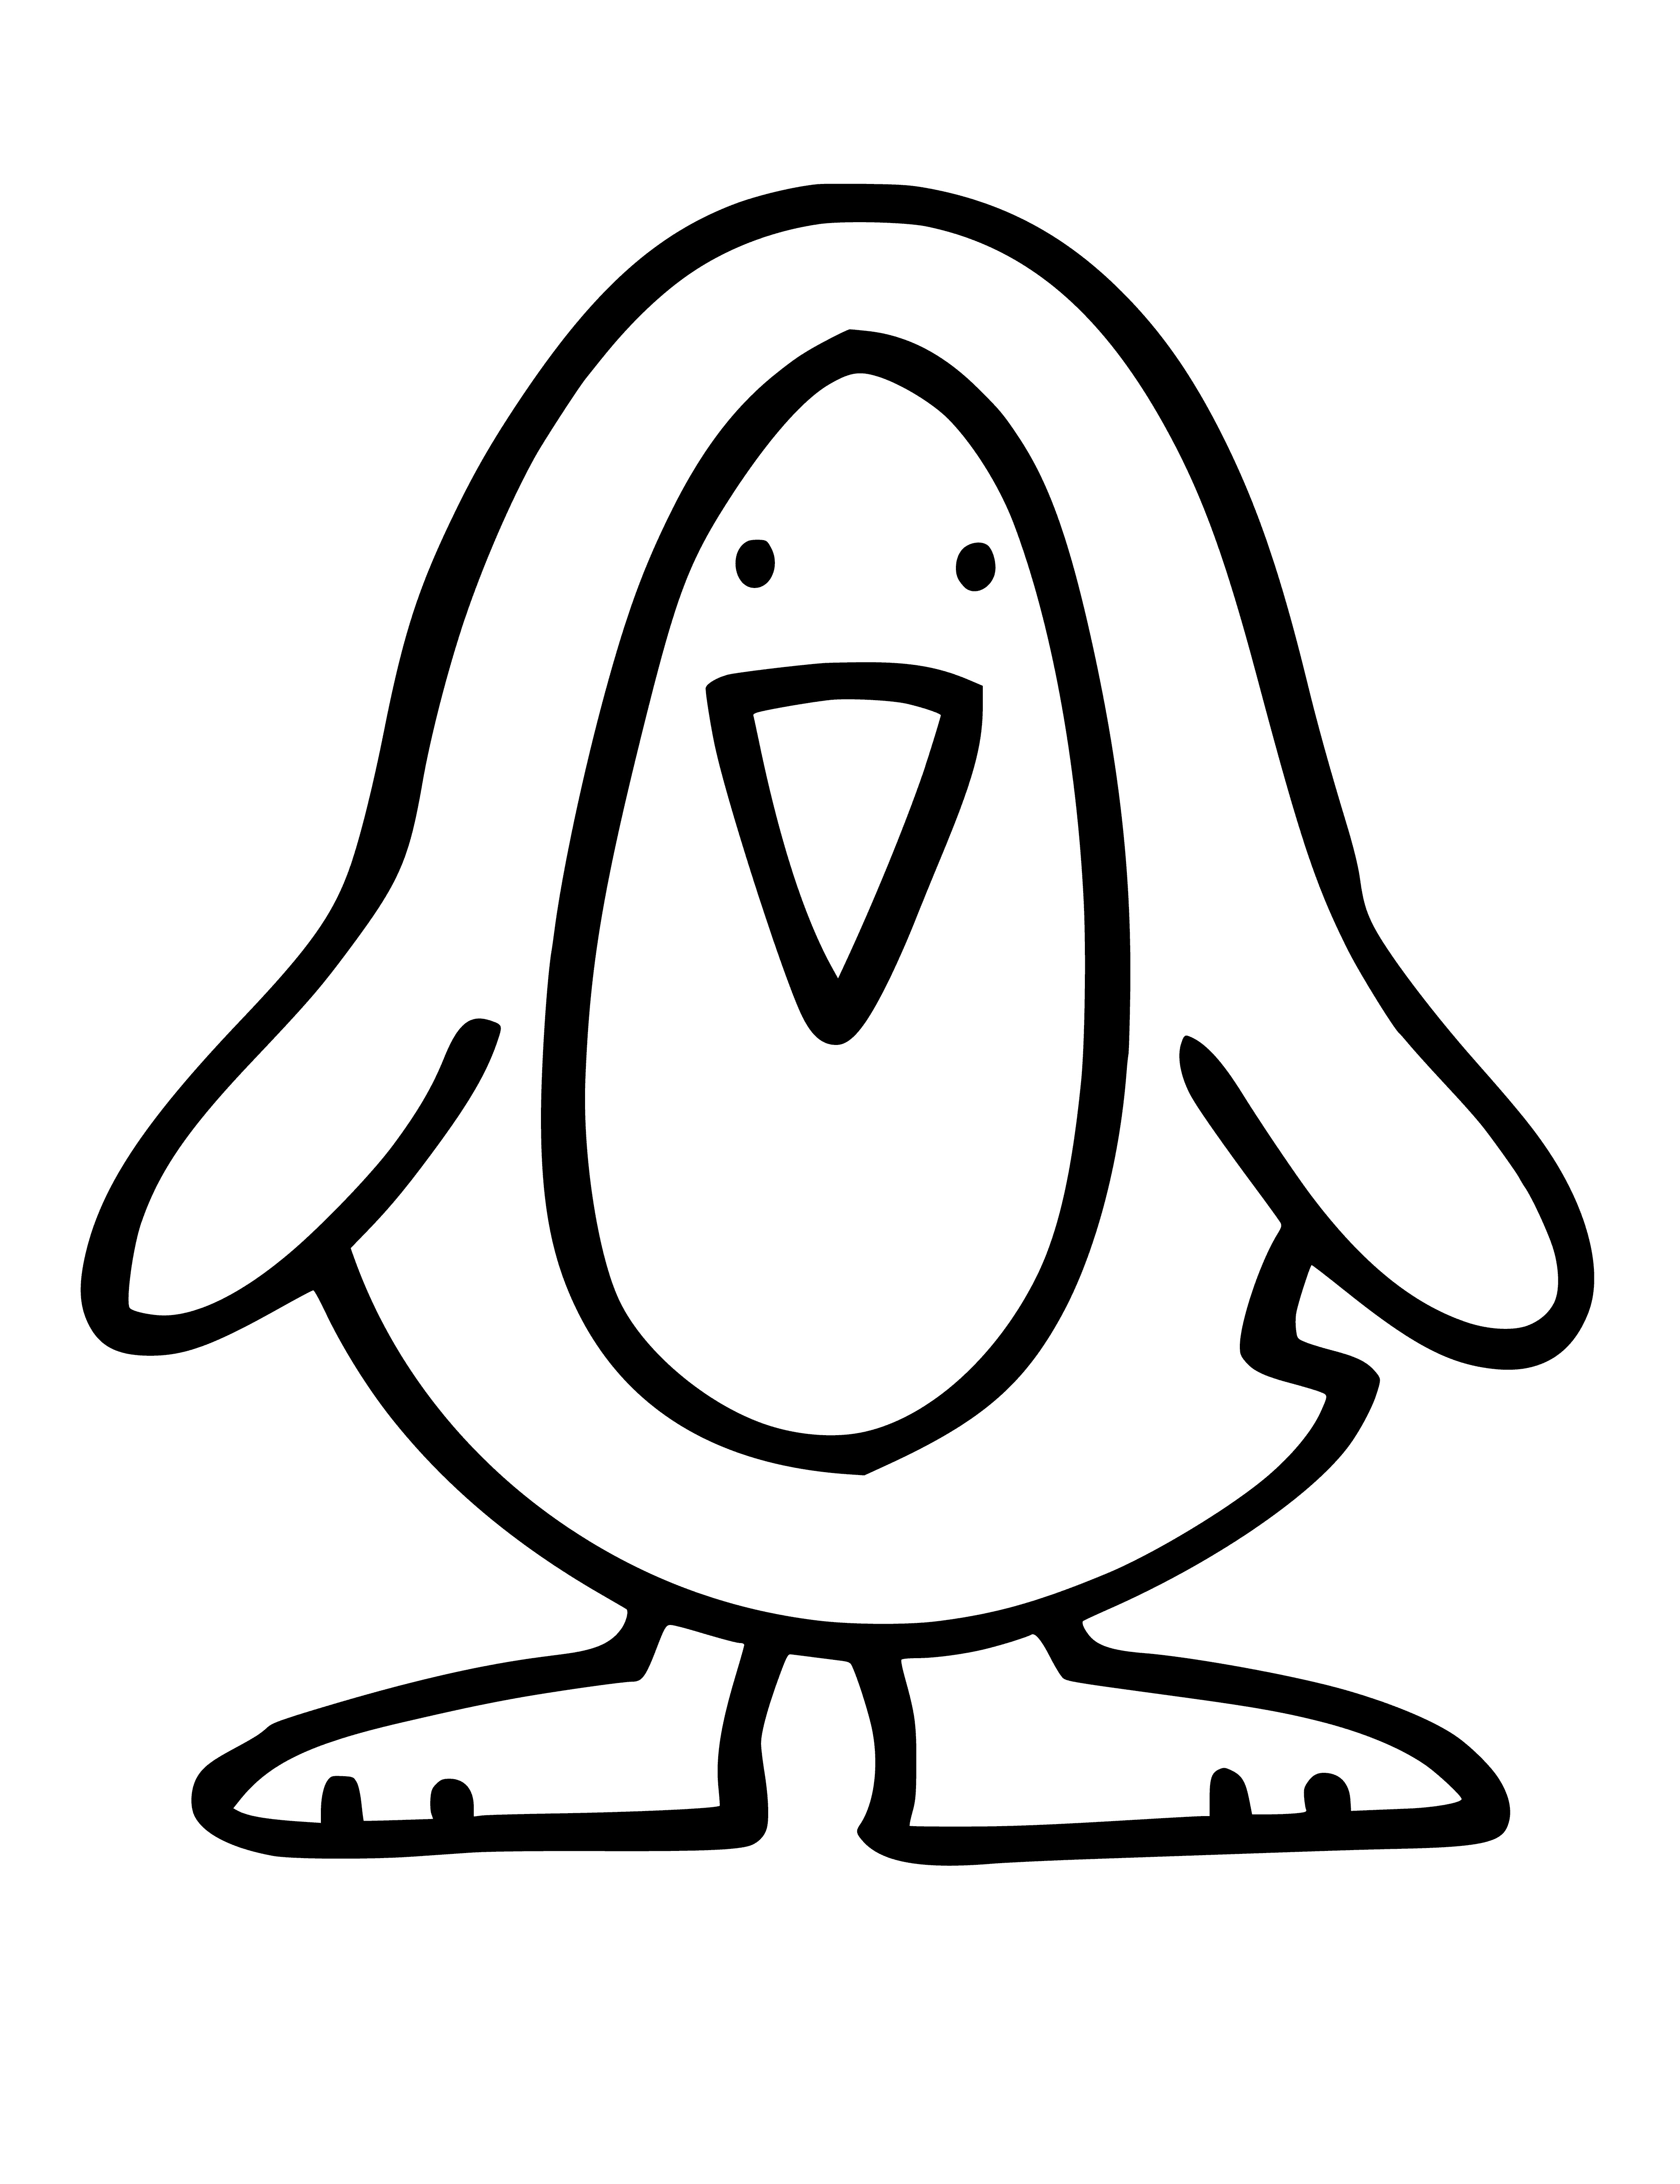 coloring page: A black and white penguin with an orange beak and a fish nearby stand on a sheet of ice. #animals #penguins #nature